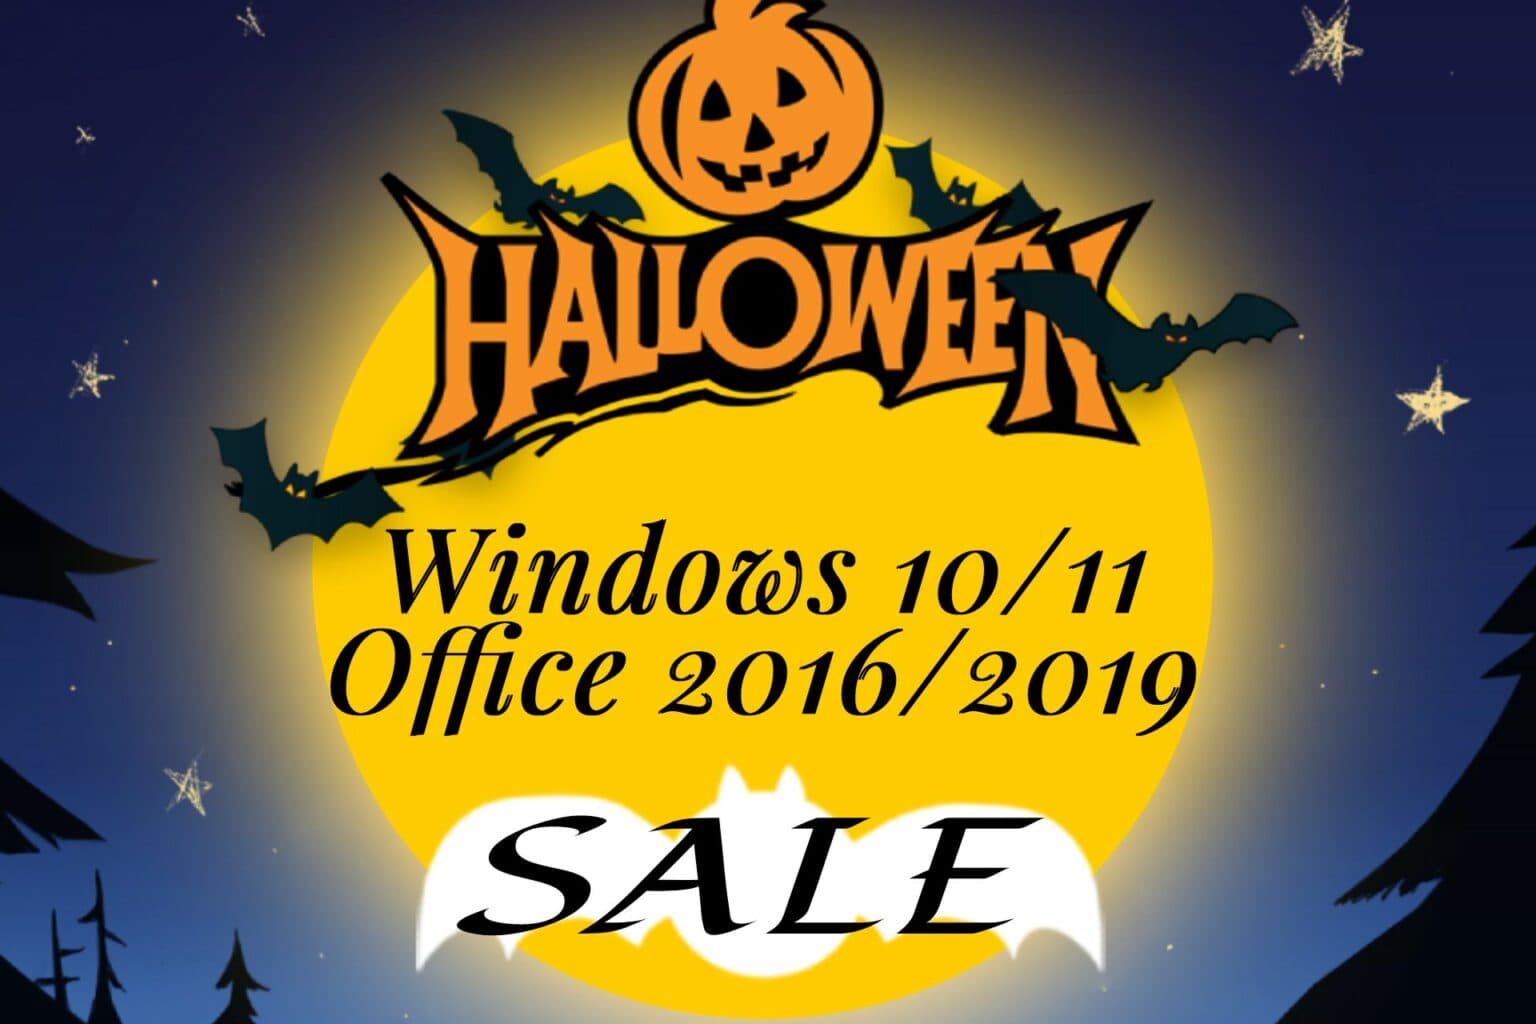 Get scary-good deals on Microsoft software by using promo code CULT at CdkeySales.com.